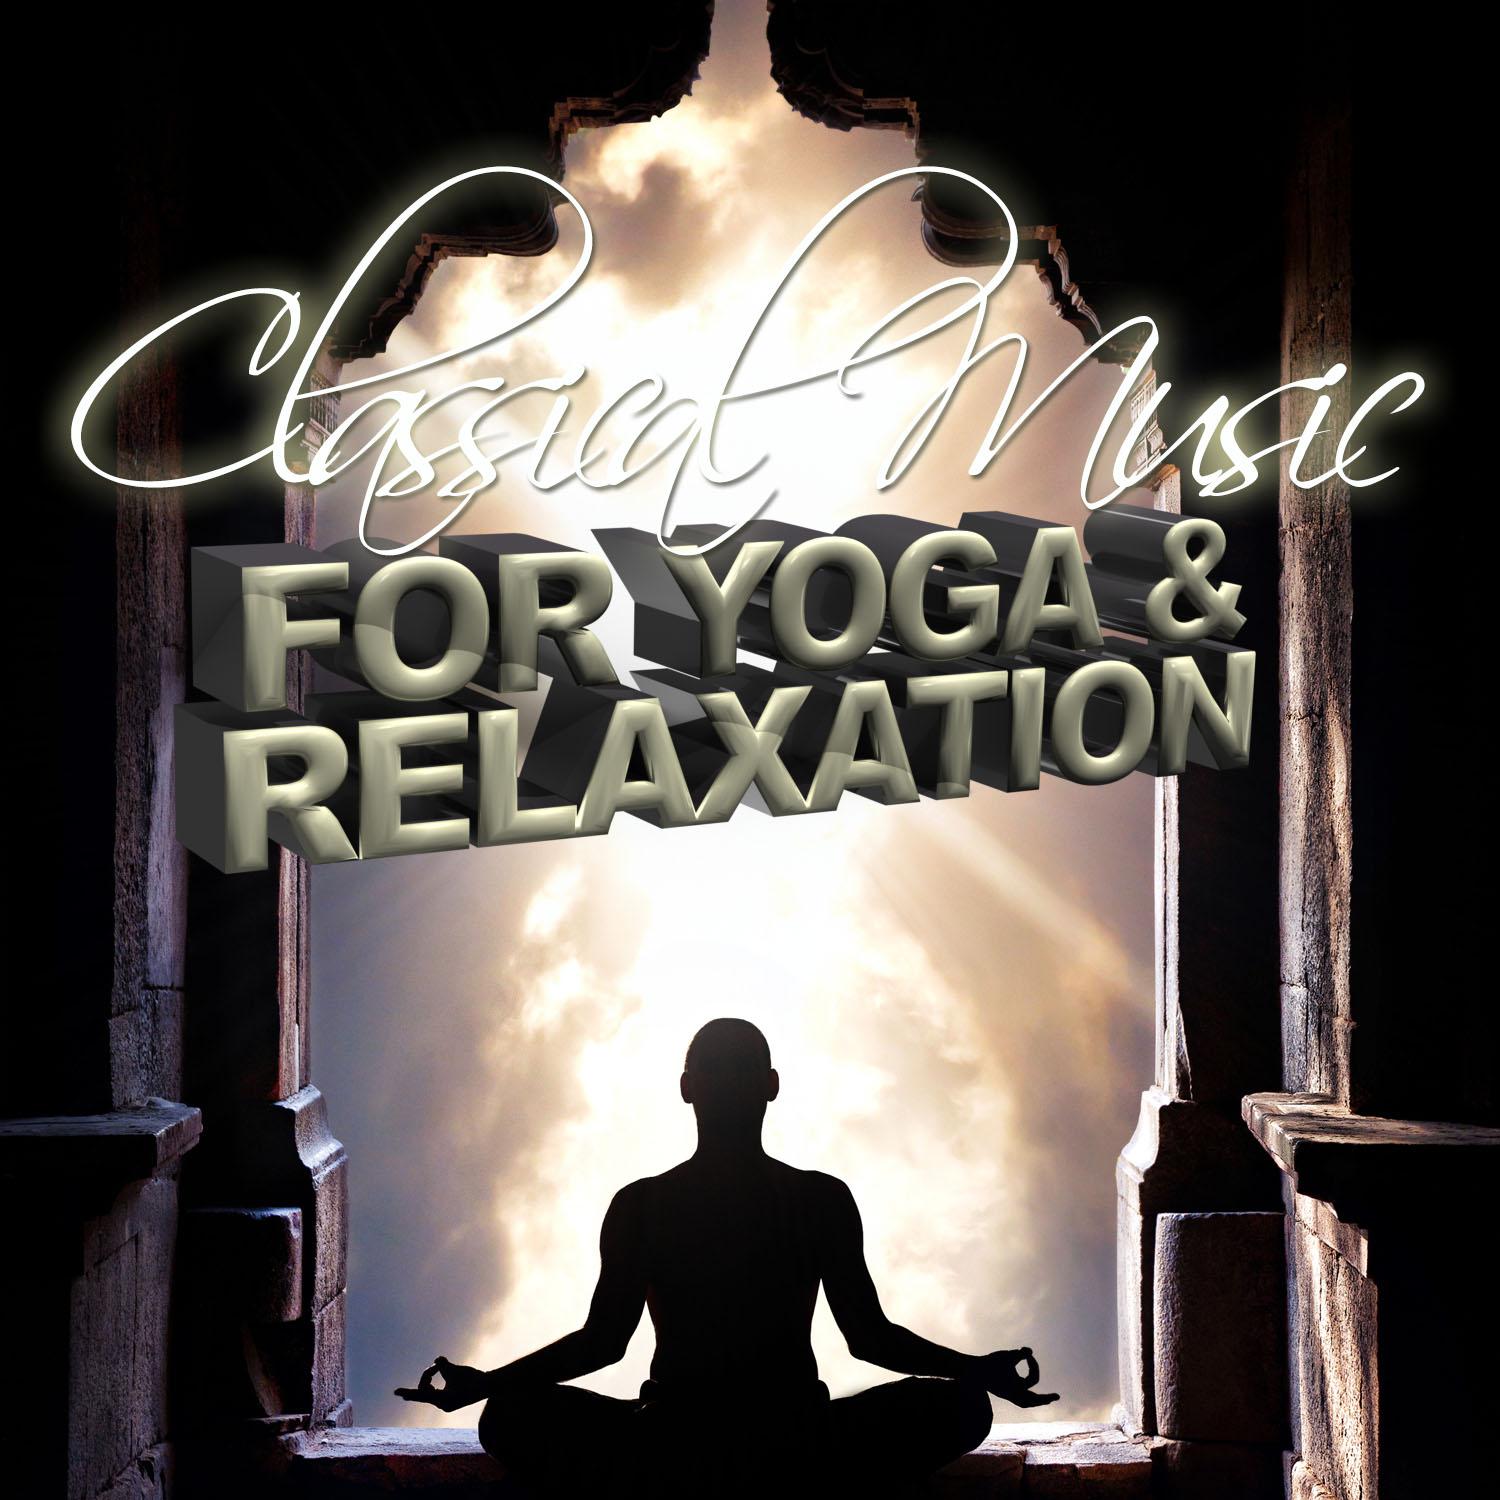 Classical Music for Yoga and Relaxation